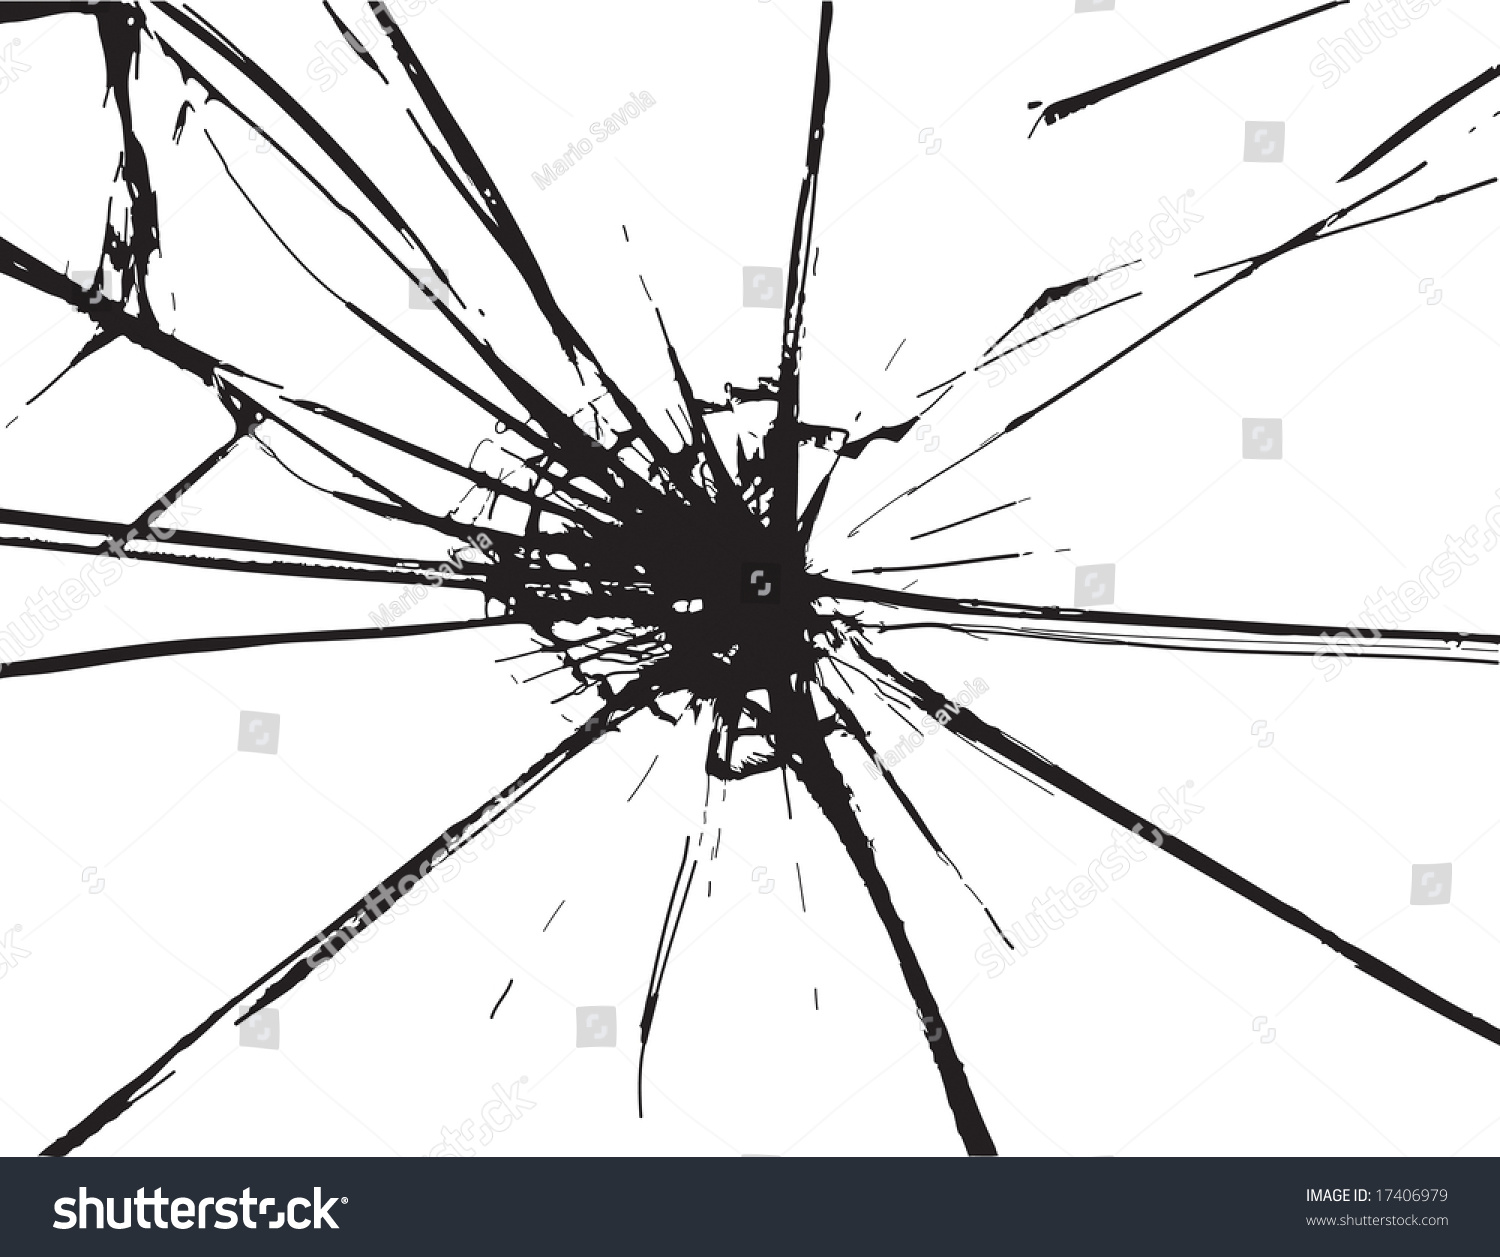 free clip art cracked glass - photo #19